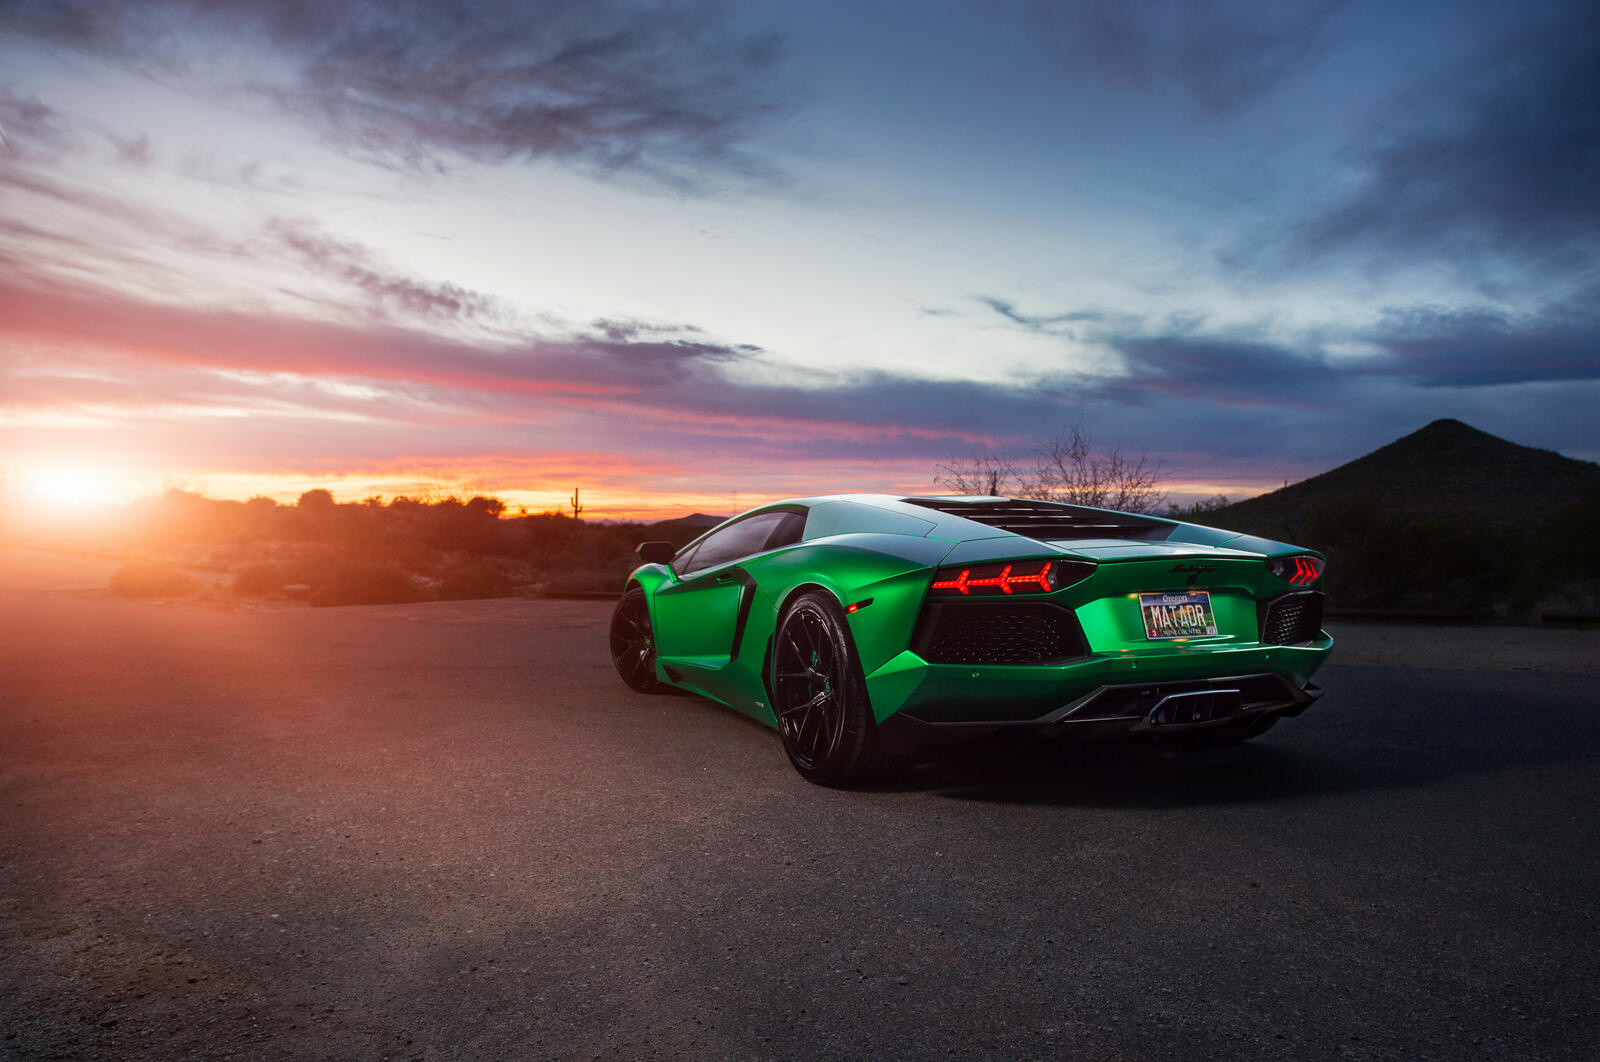 Free photo A picture for your computer with a green Lamborghini Aventador.